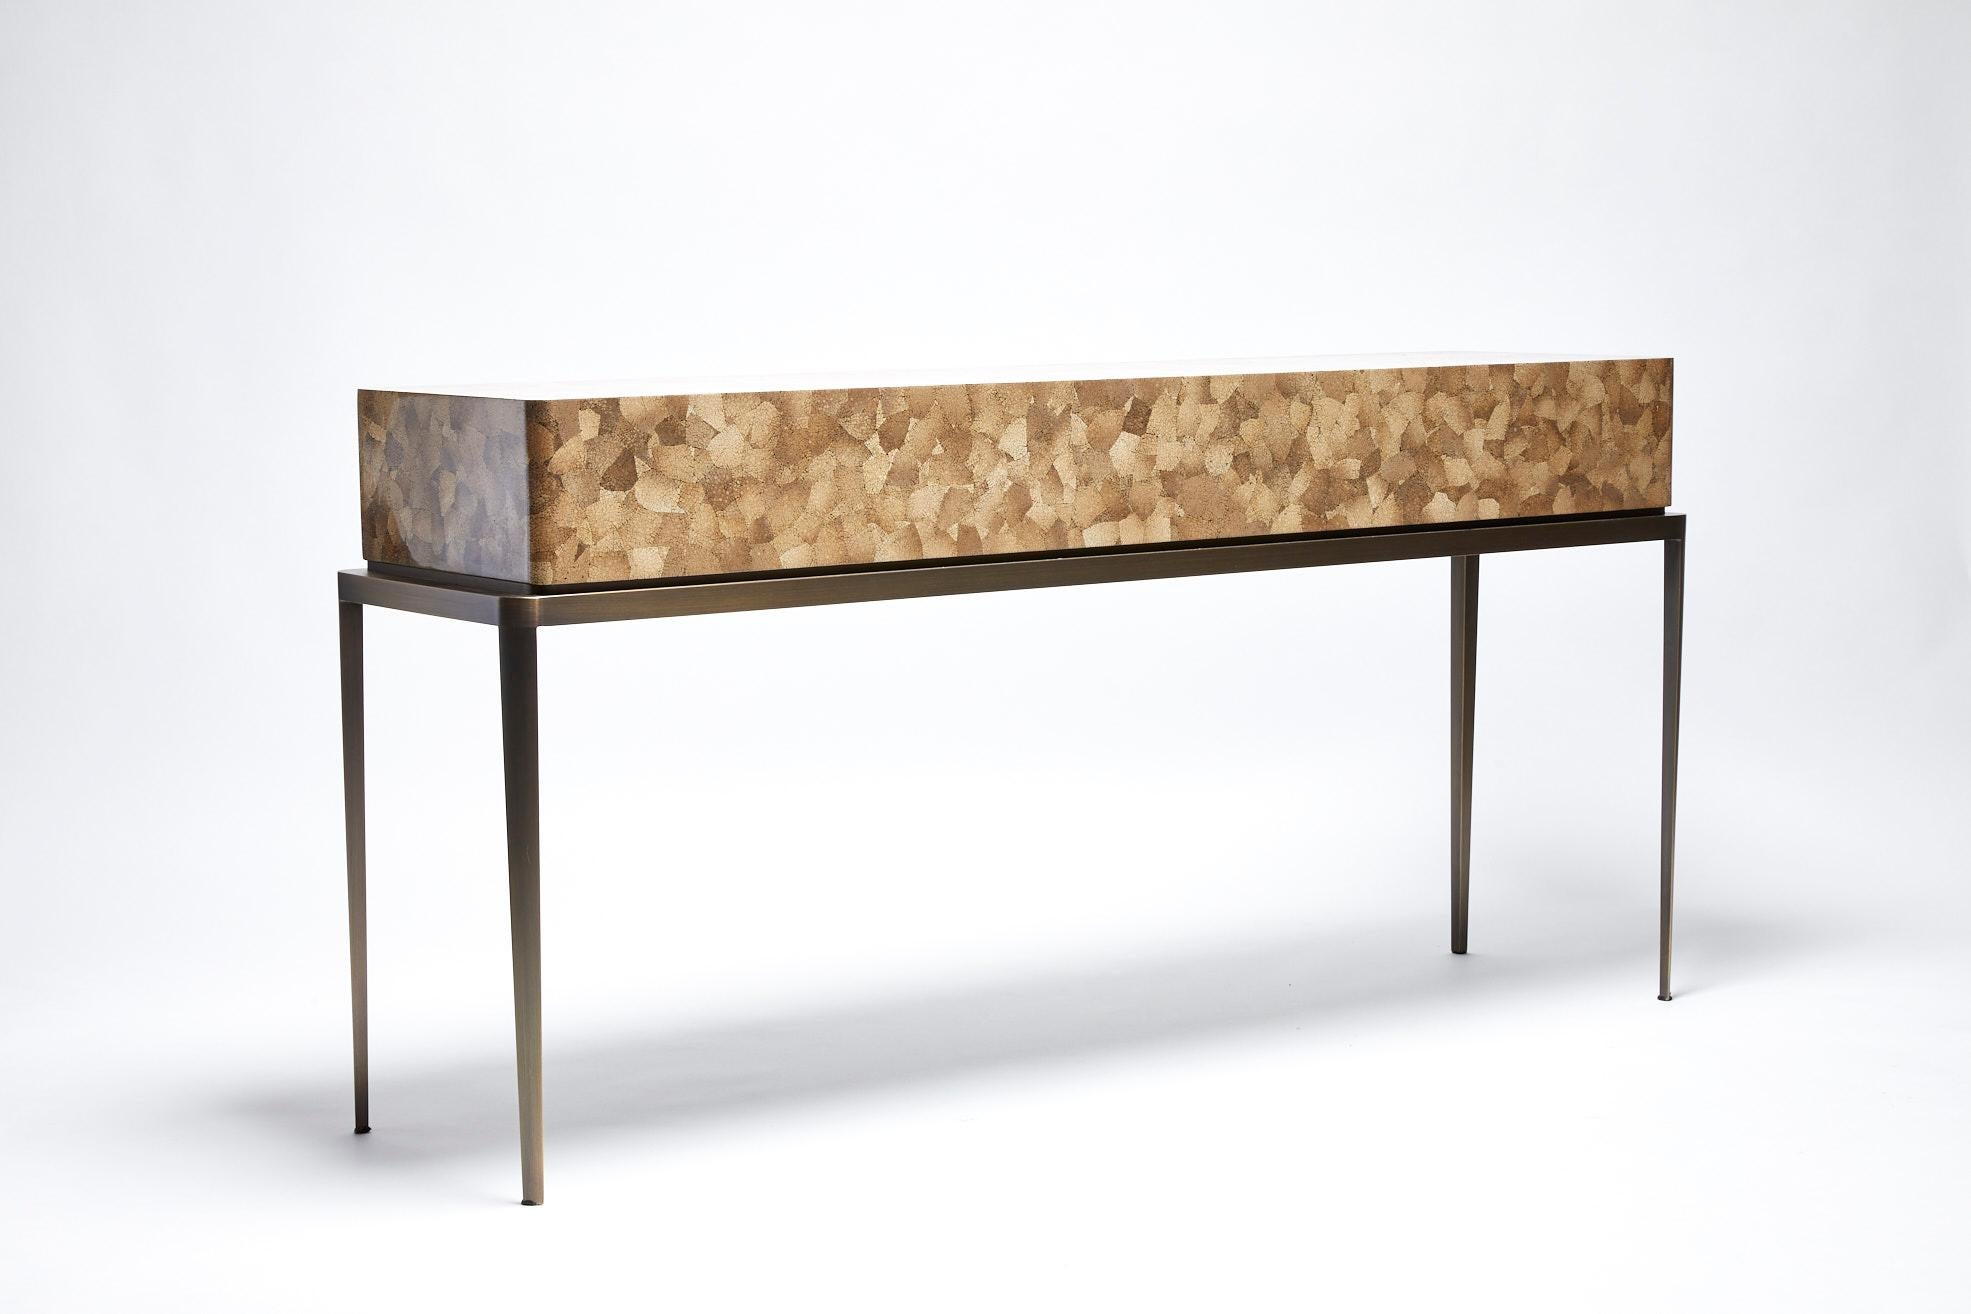 The Gallery collection showcases exclusive designs by Reda Amalou.
The pieces are crafted by some of the best artisans around the world and are edited as a series of 8 and 4 artist’s proofs. 
Each piece is signed and numbered.

This elegant console